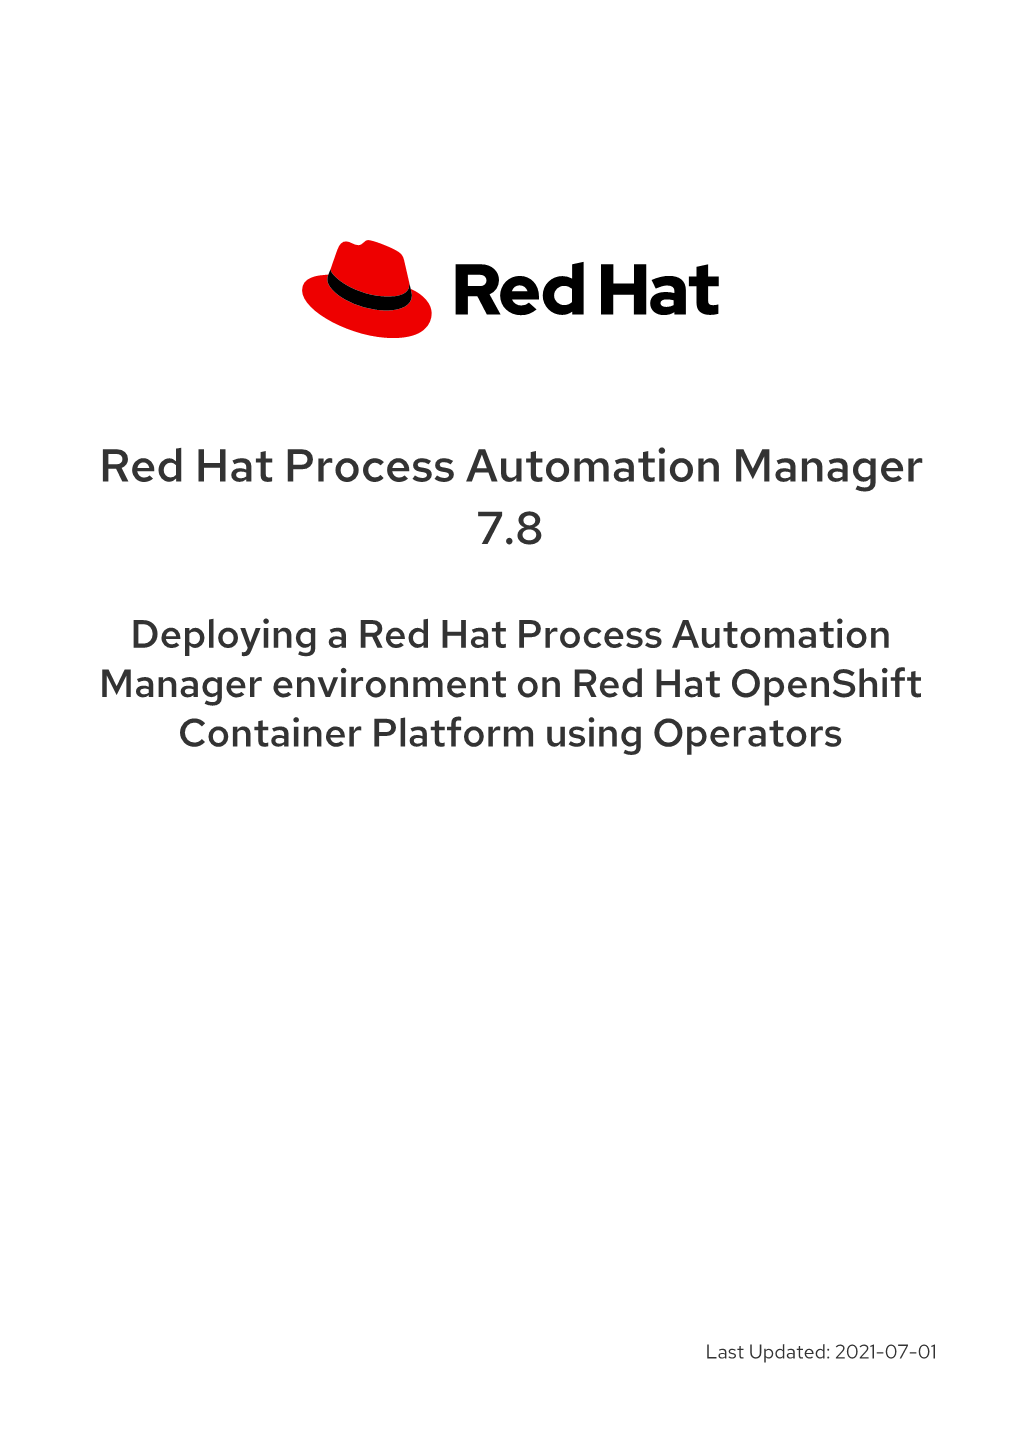 Red Hat Process Automation Manager 7.8 Deploying a Red Hat Process Automation Manager Environment on Red Hat Openshift Container Platform Using Operators